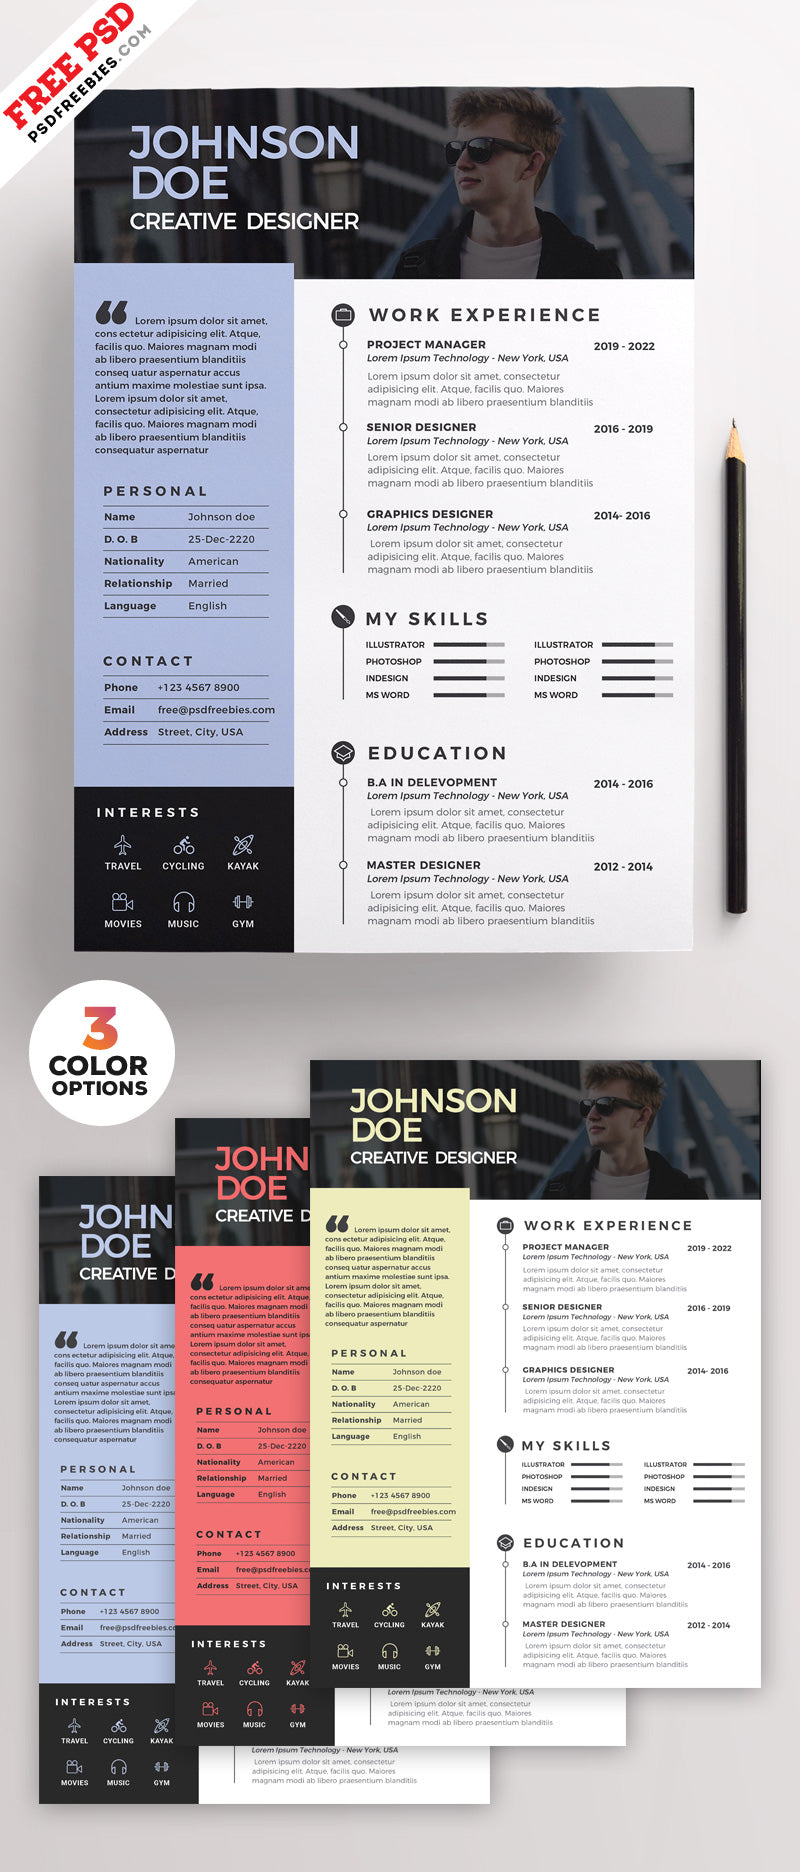 Free Clean Minimal CV Resume Design Template in Photoshop (PSD) Format